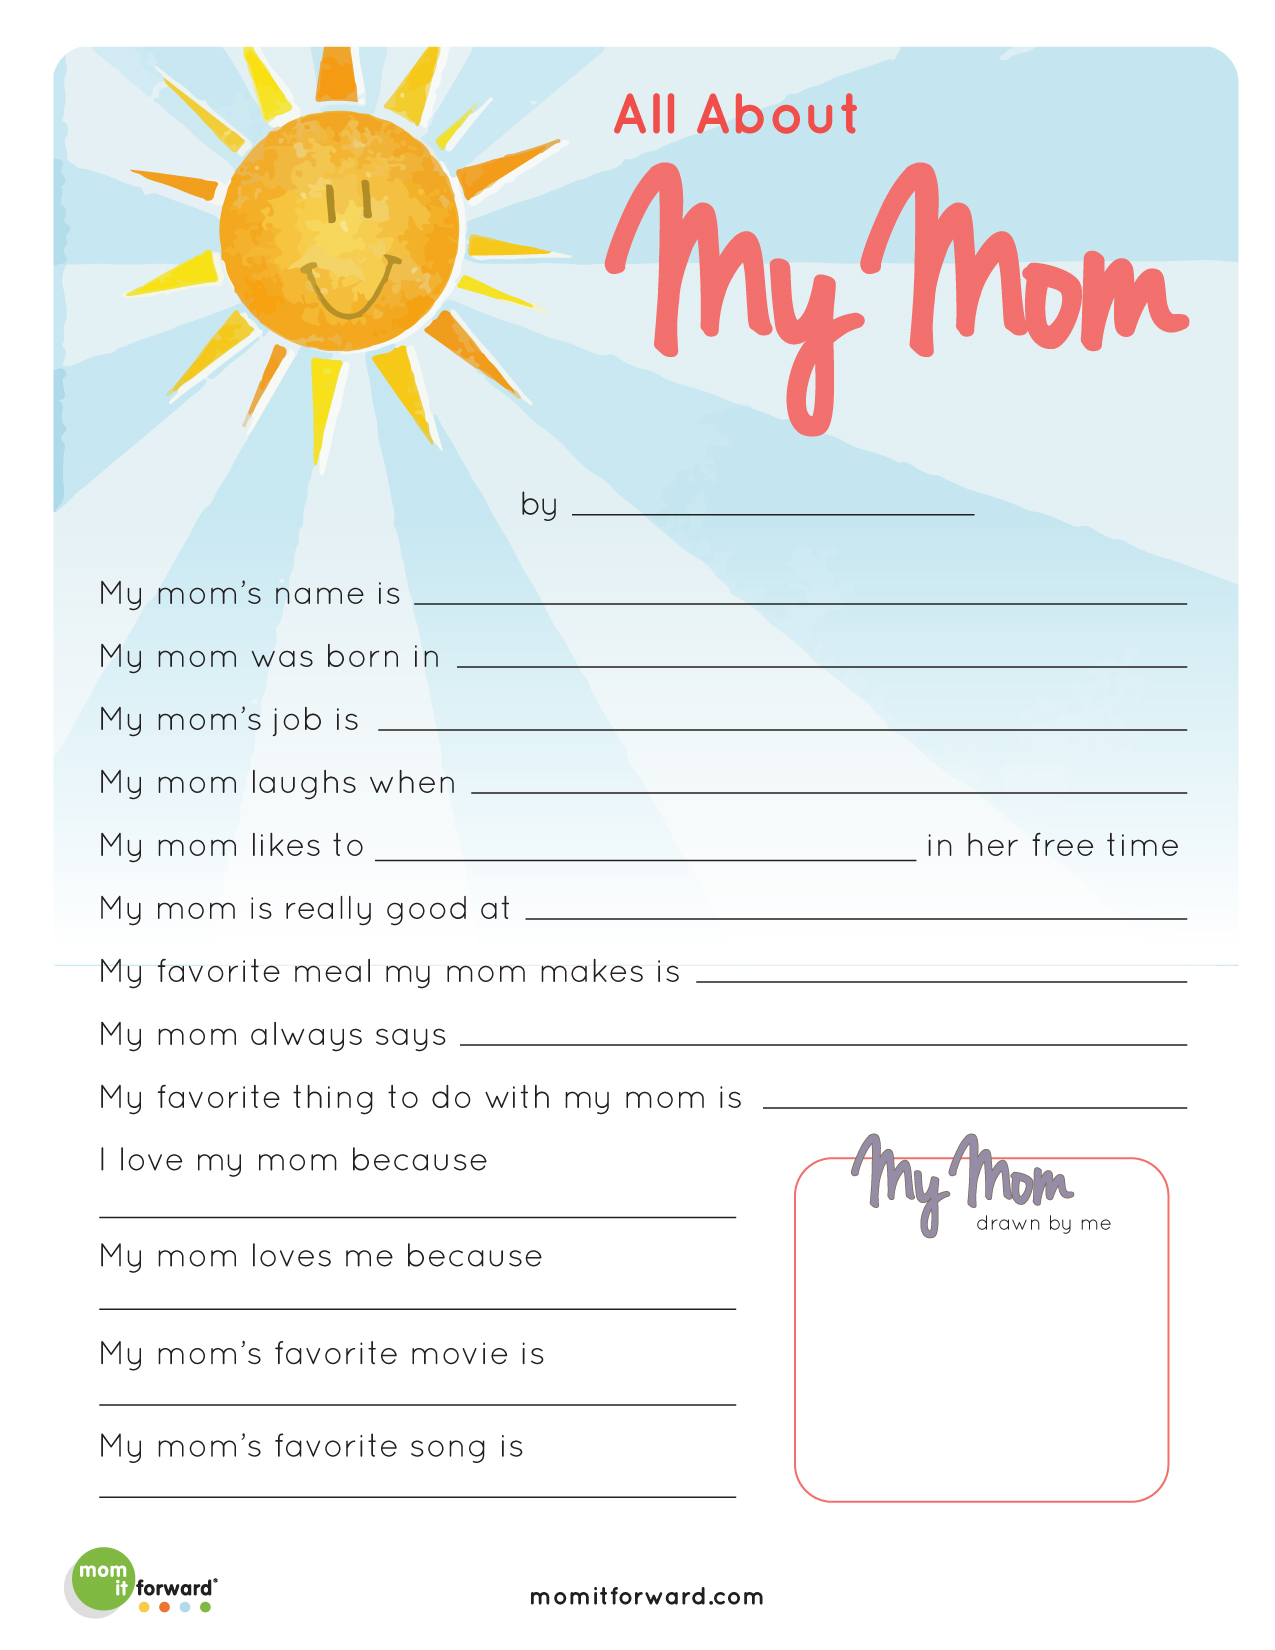 Mother's Day All About My Mom Printable Mom it ForwardMom it Forward